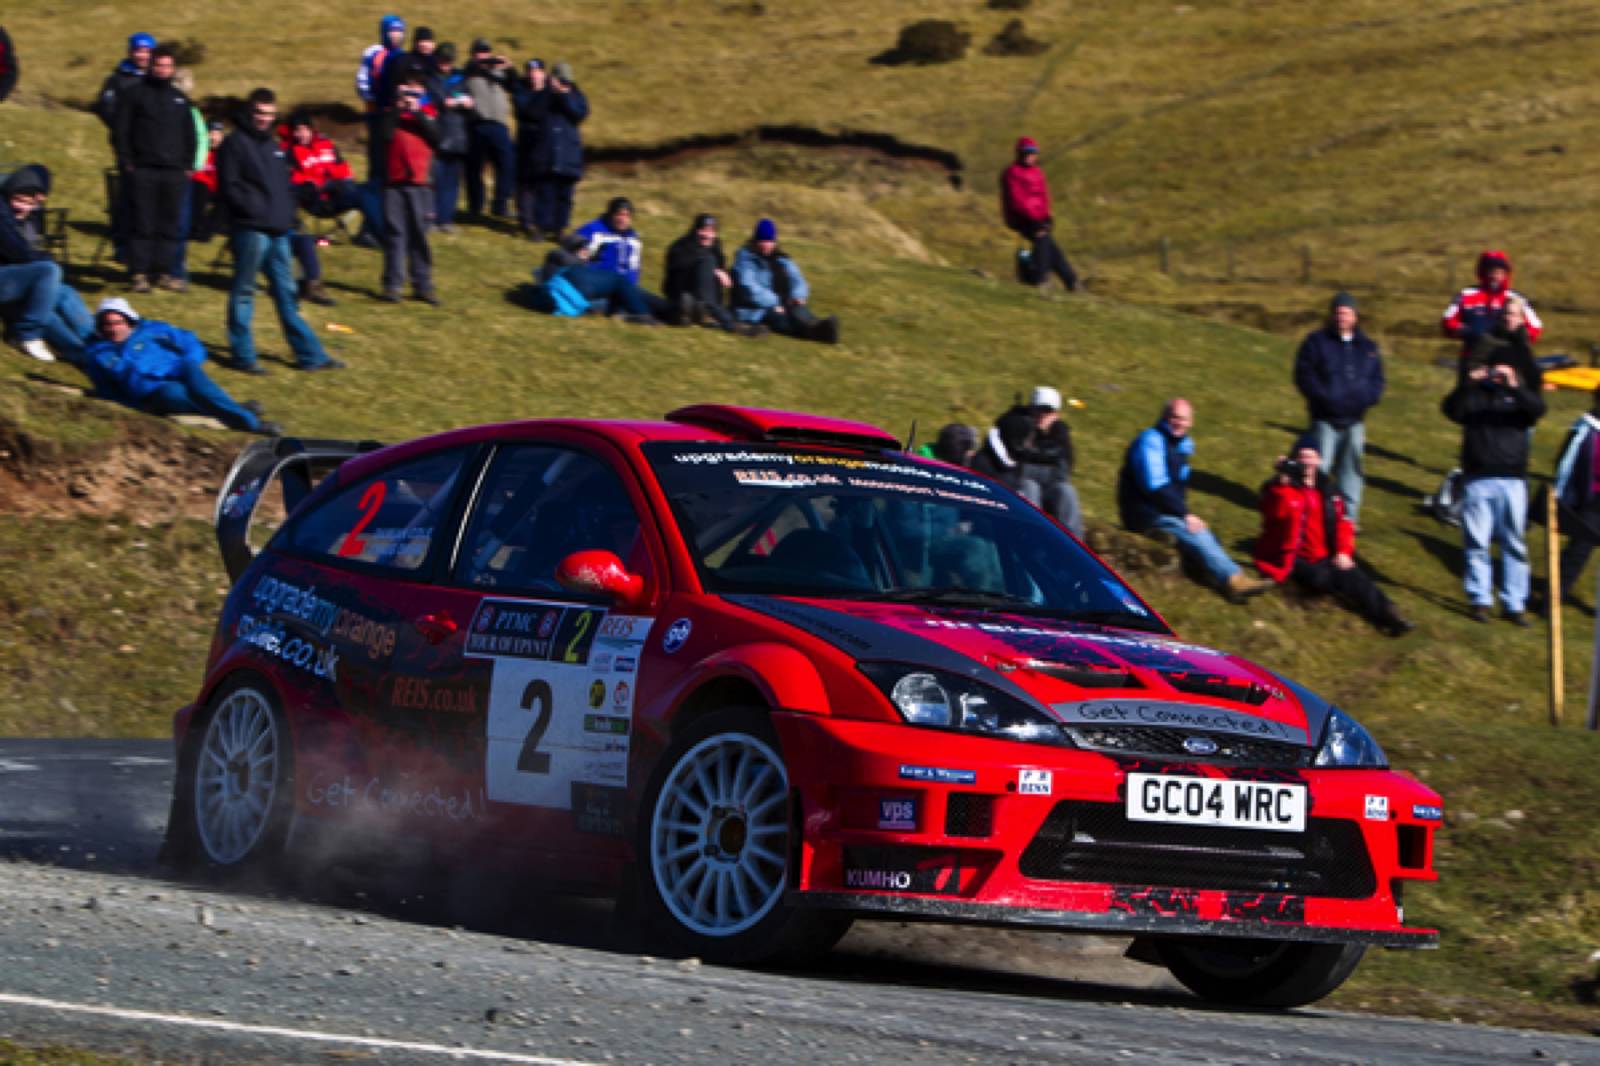 get-connected-rally-team-gallery-tou-of-epynt-2011-00006